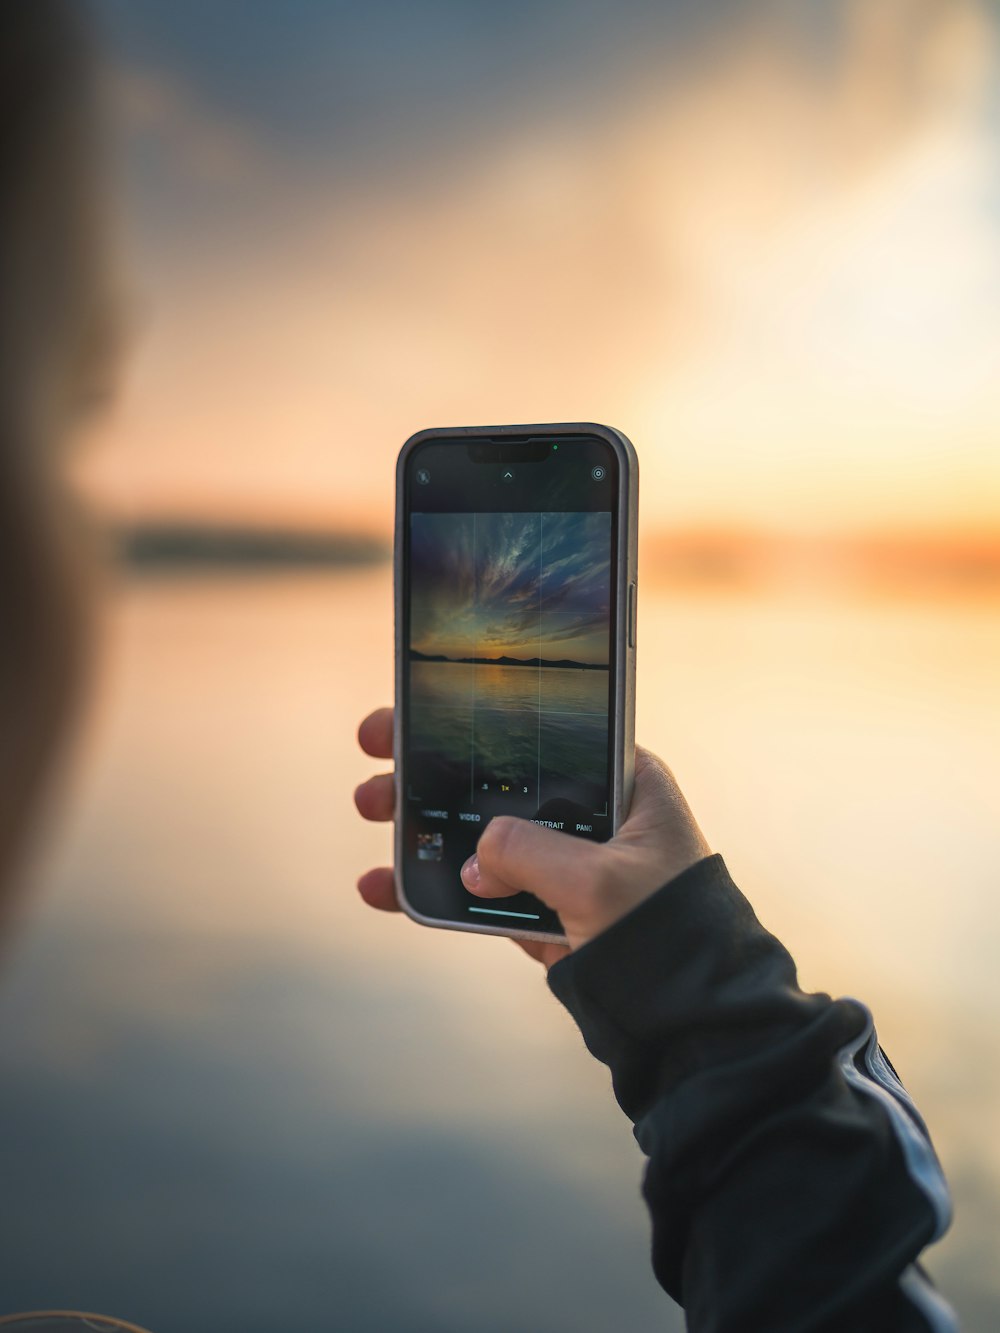 a person holding up a cell phone in front of a body of water